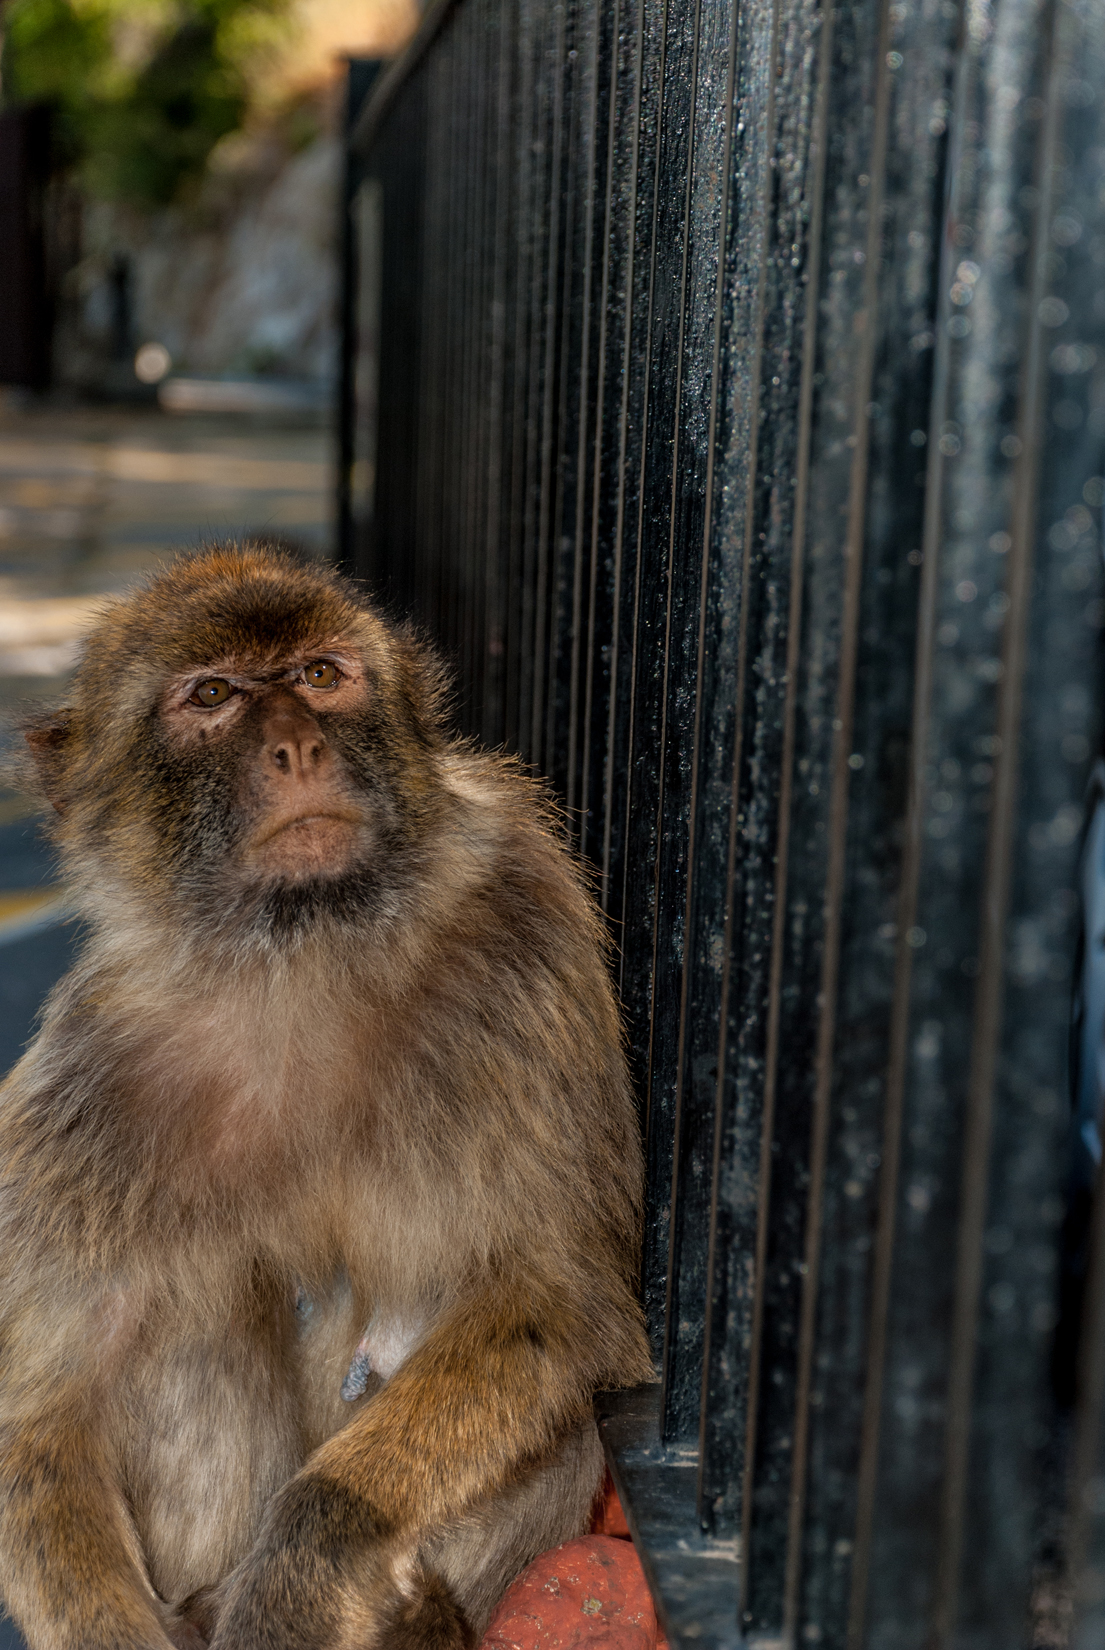 Gibraltar is home to a unique population of Barbary macaques